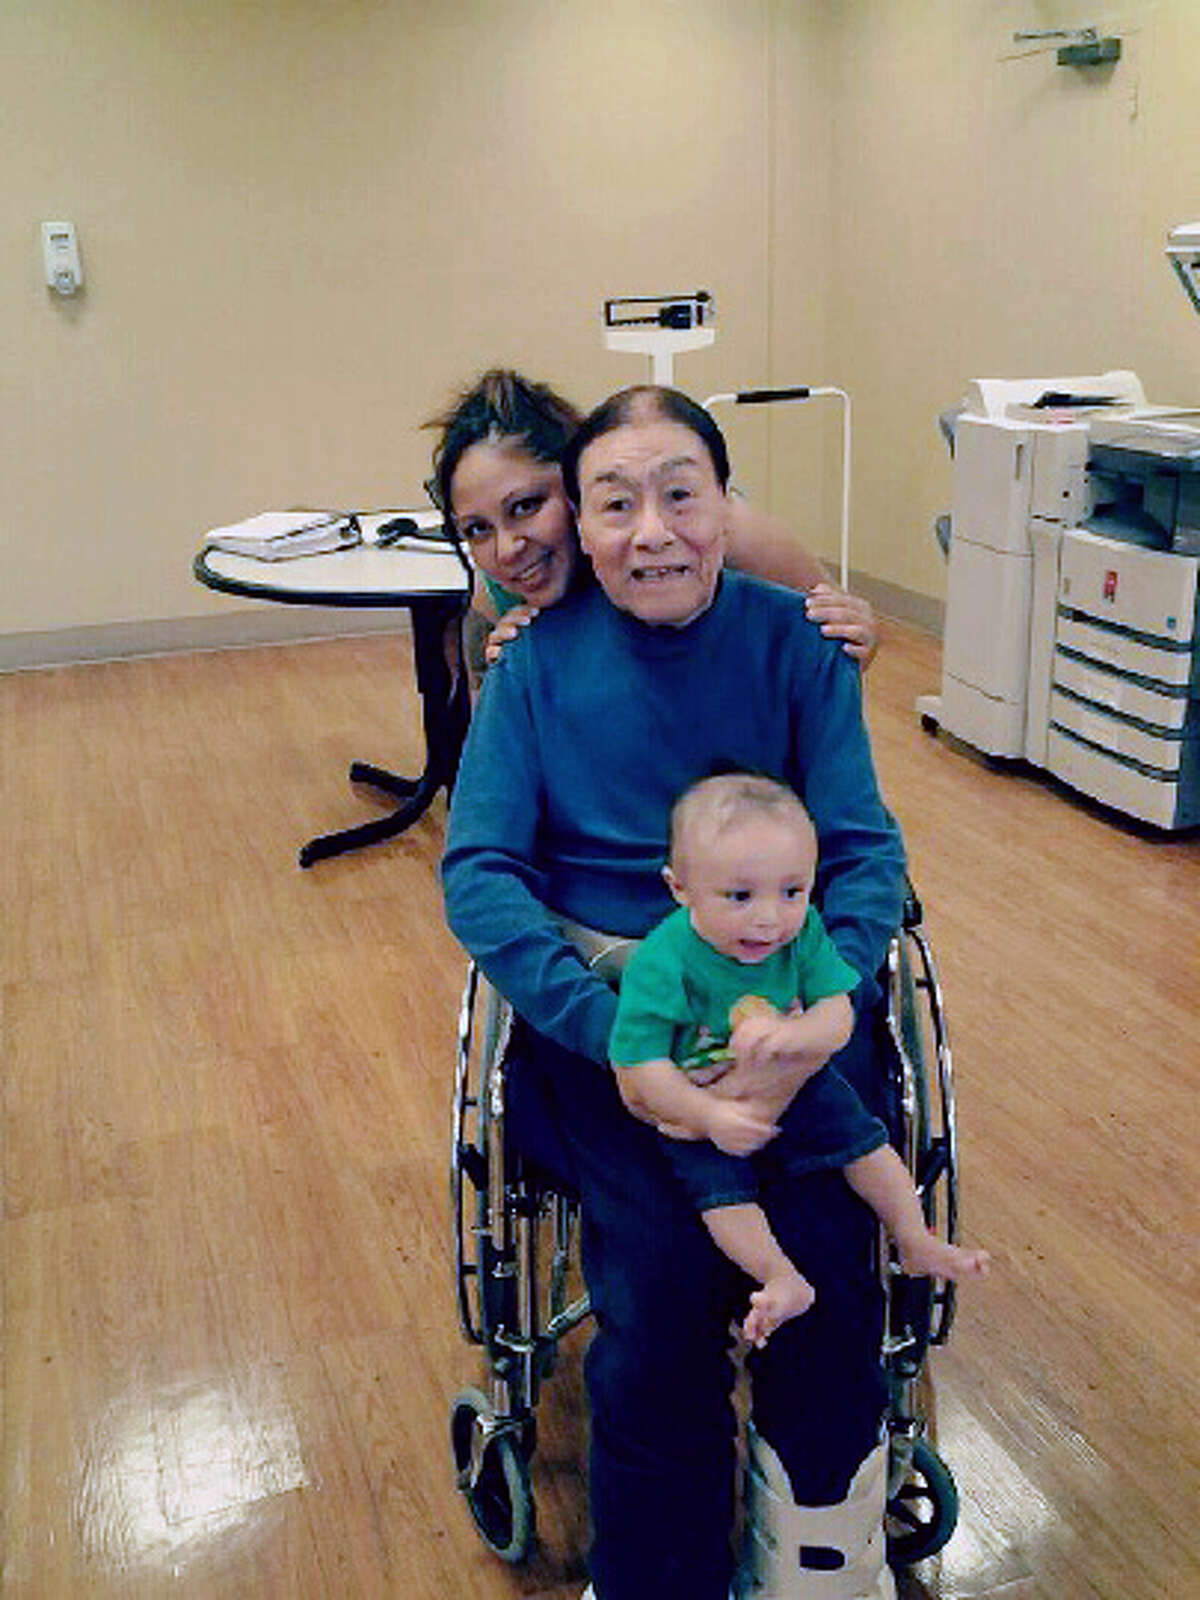 This image provided by Sergio Godoy shows his sister Janet Godoy, rear, grandfather Antonio Acosta and Janet Godoy's son Juan Manuel Gonzalez. Police say a resident of a Houston nursing home will face capital murder charges for using the armrest of his wheelchair to beat two of his roommates, including Acosta, to death. (AP Photo/Sergio Godoy)